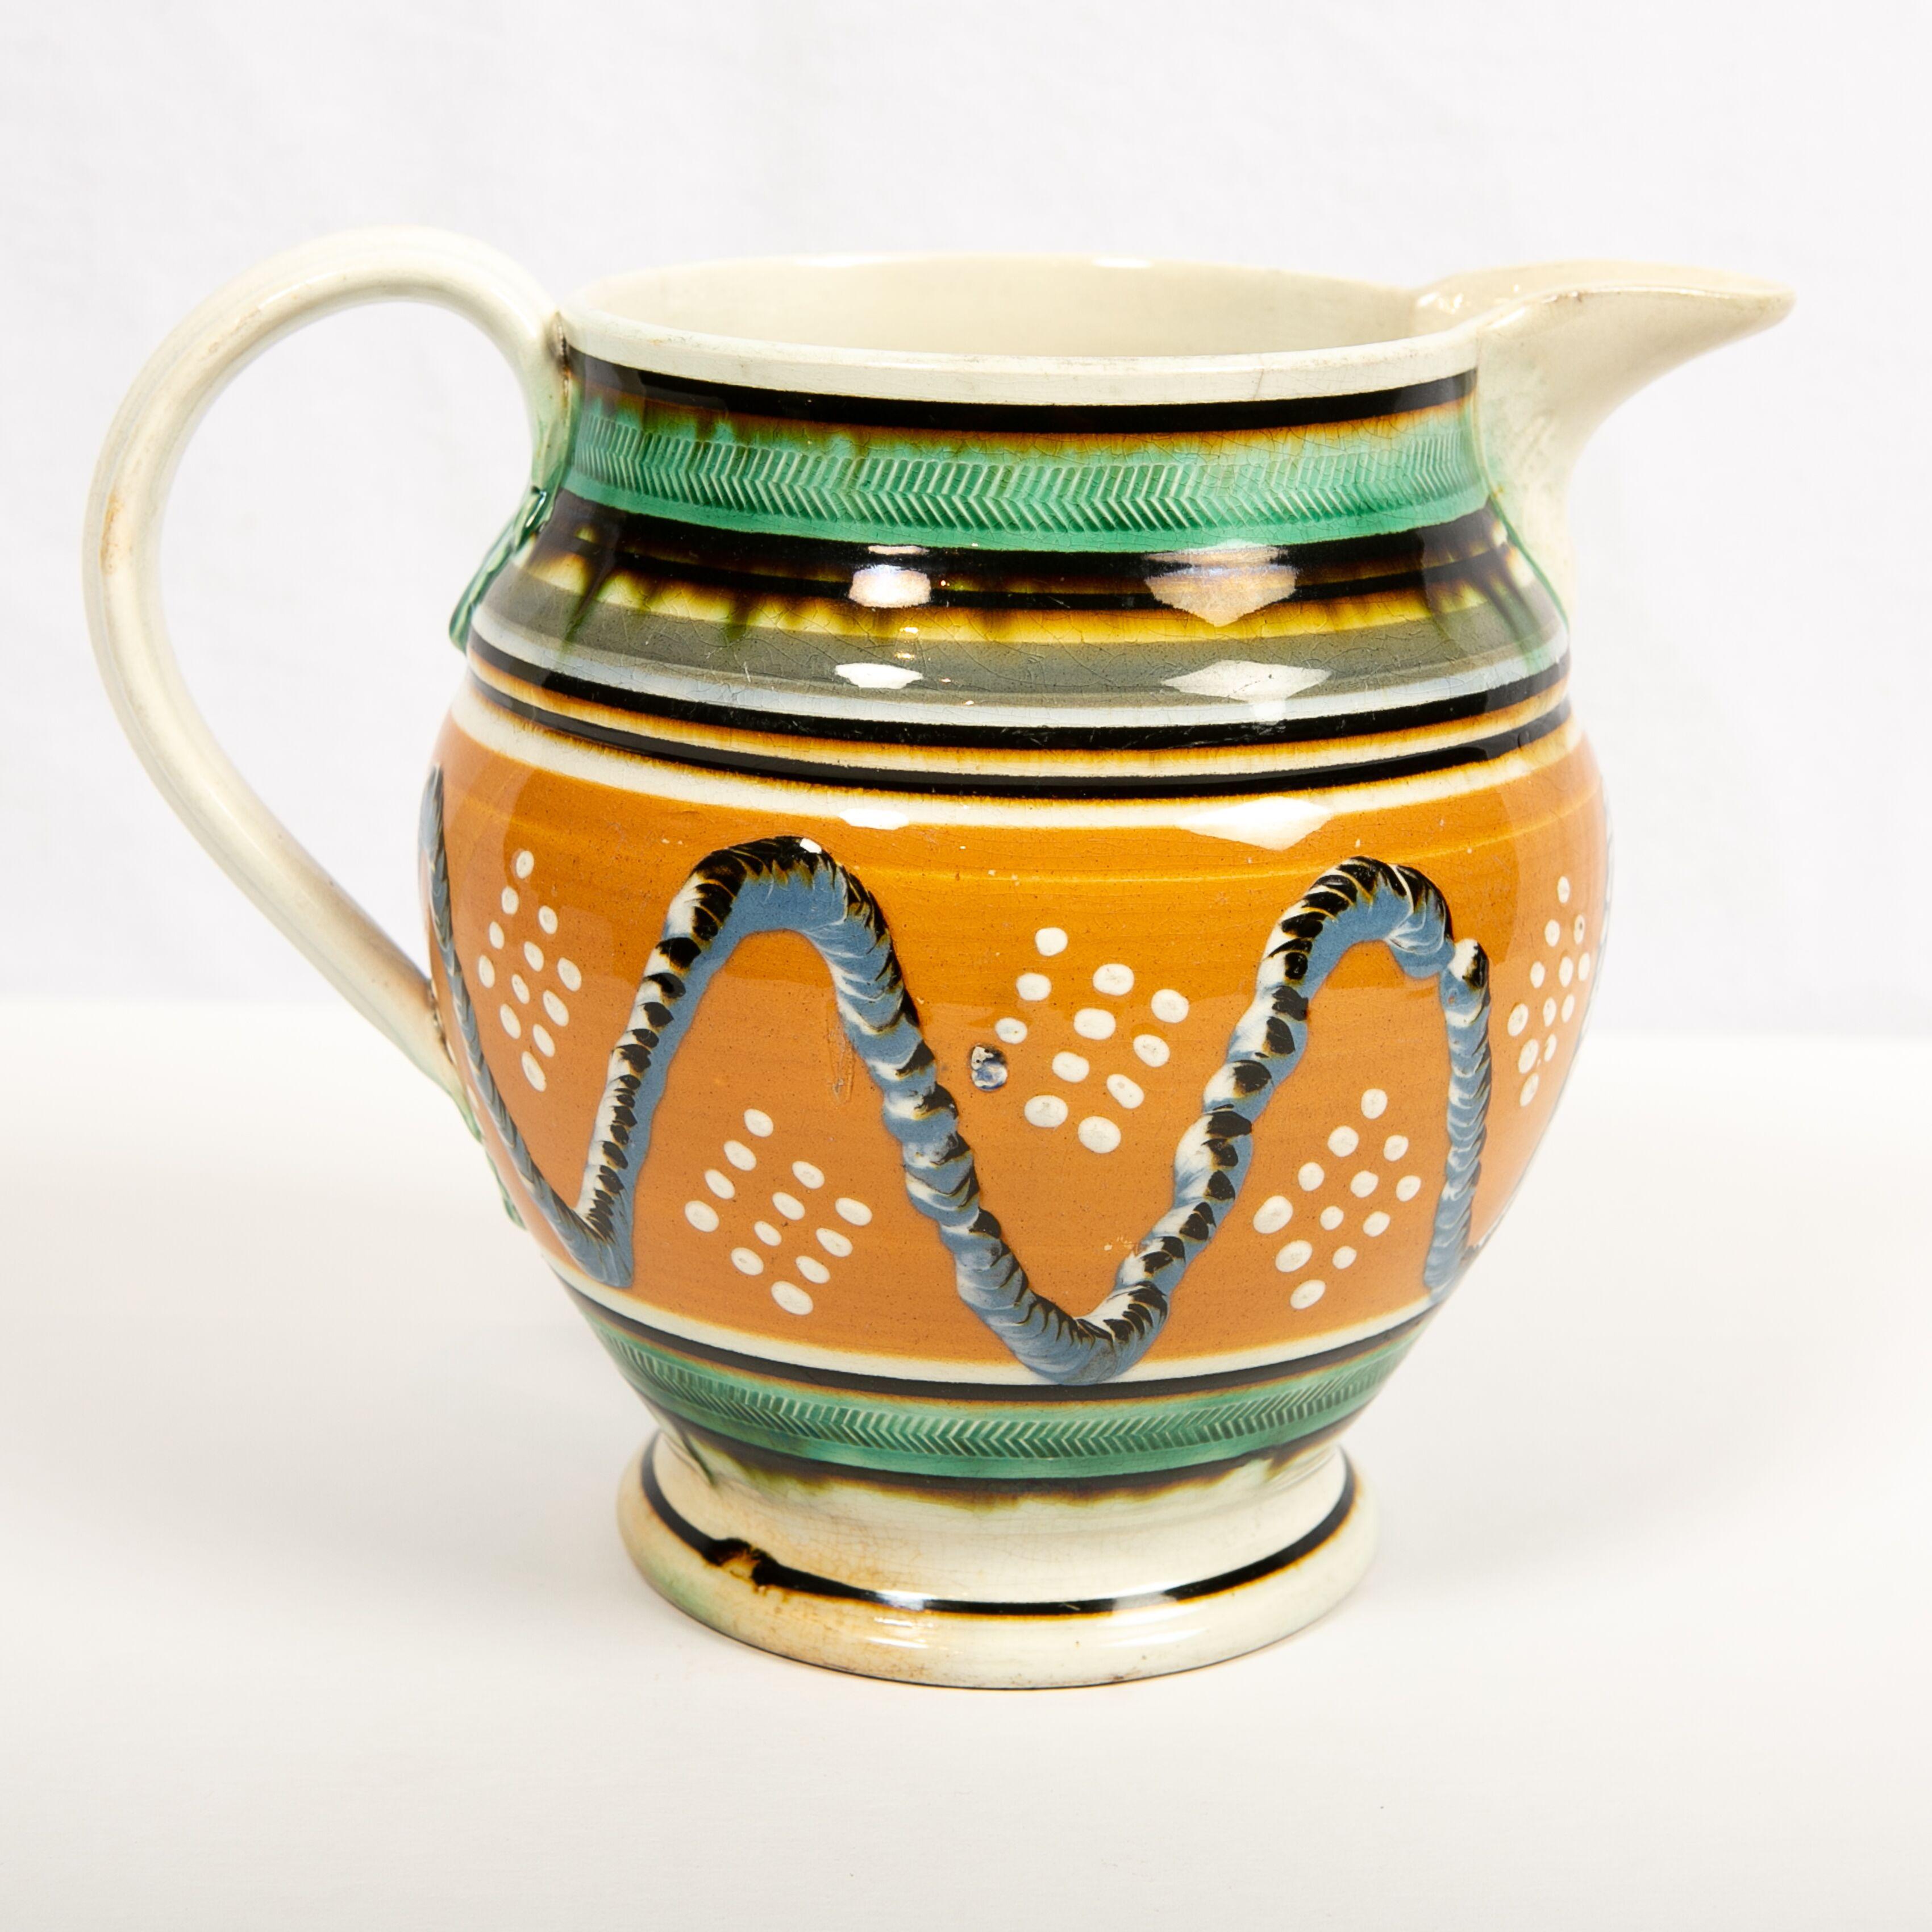 19th Century Creamware Mochaware Pitcher Decorated with Cable and Dot Decoration, England